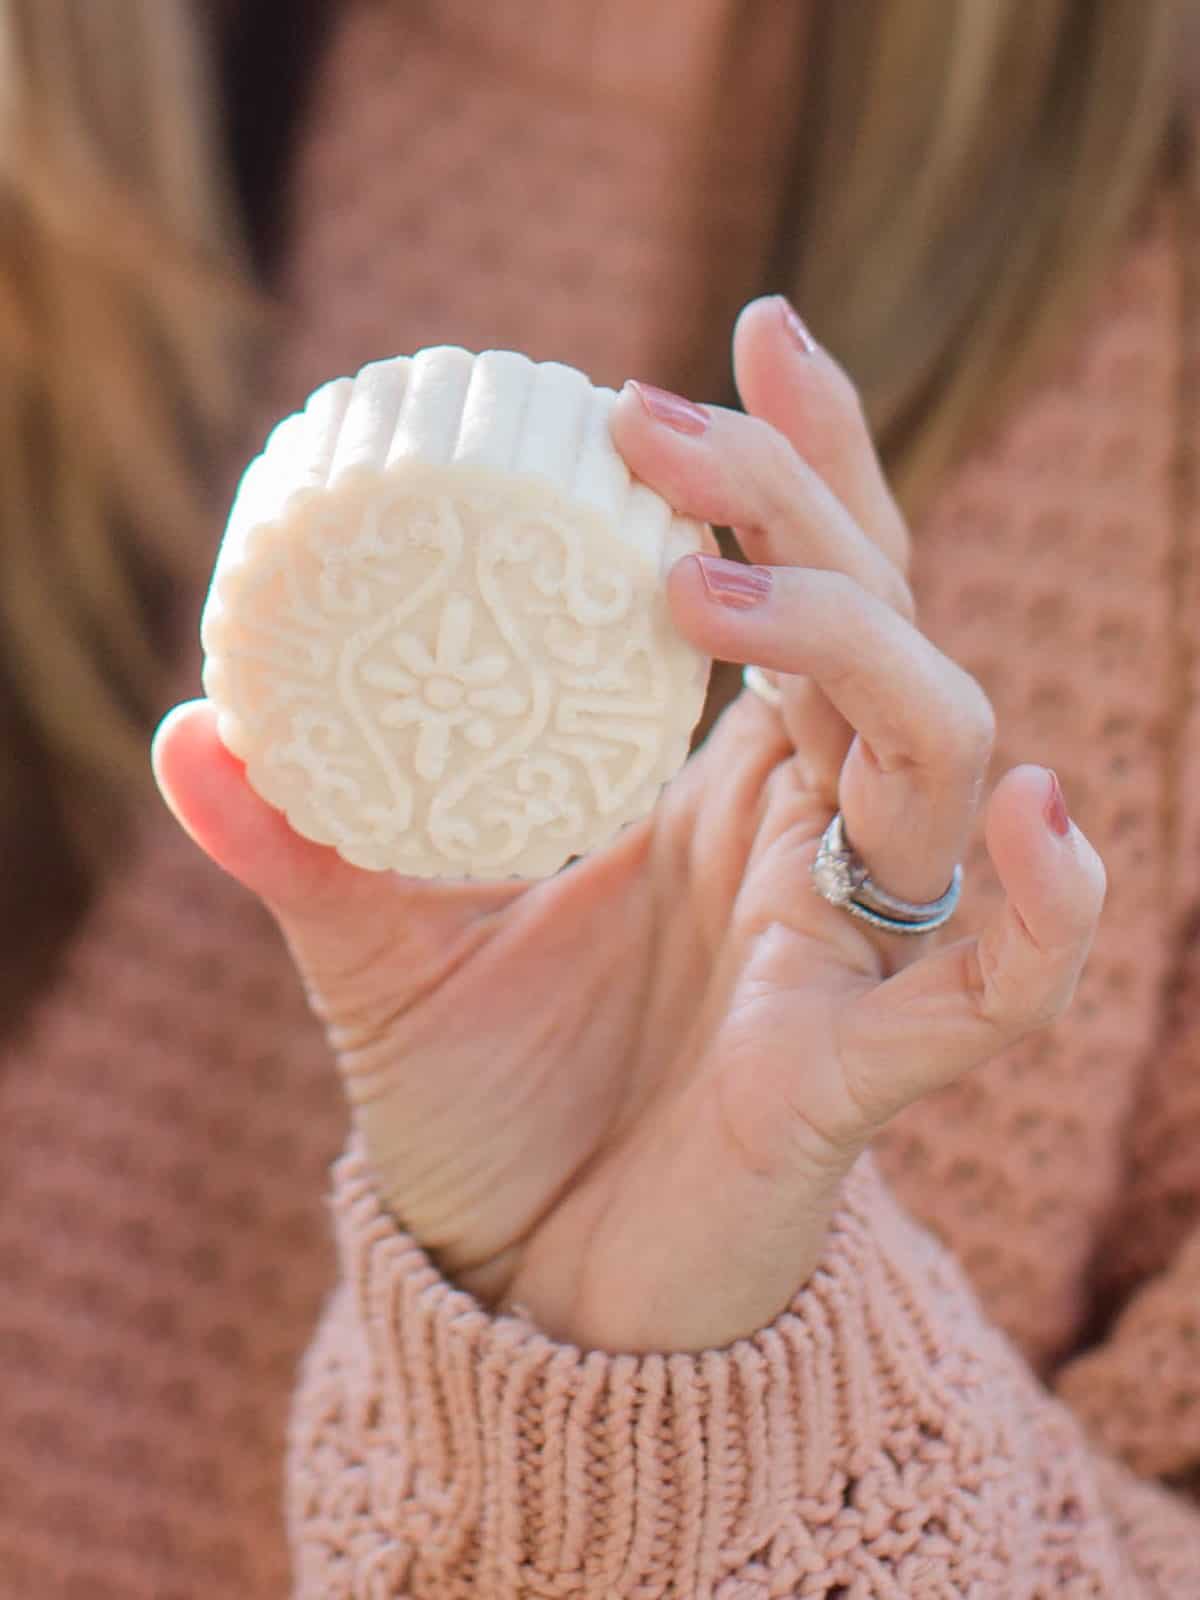 Up-close photo of a solid shampoo bar unwrapped. 